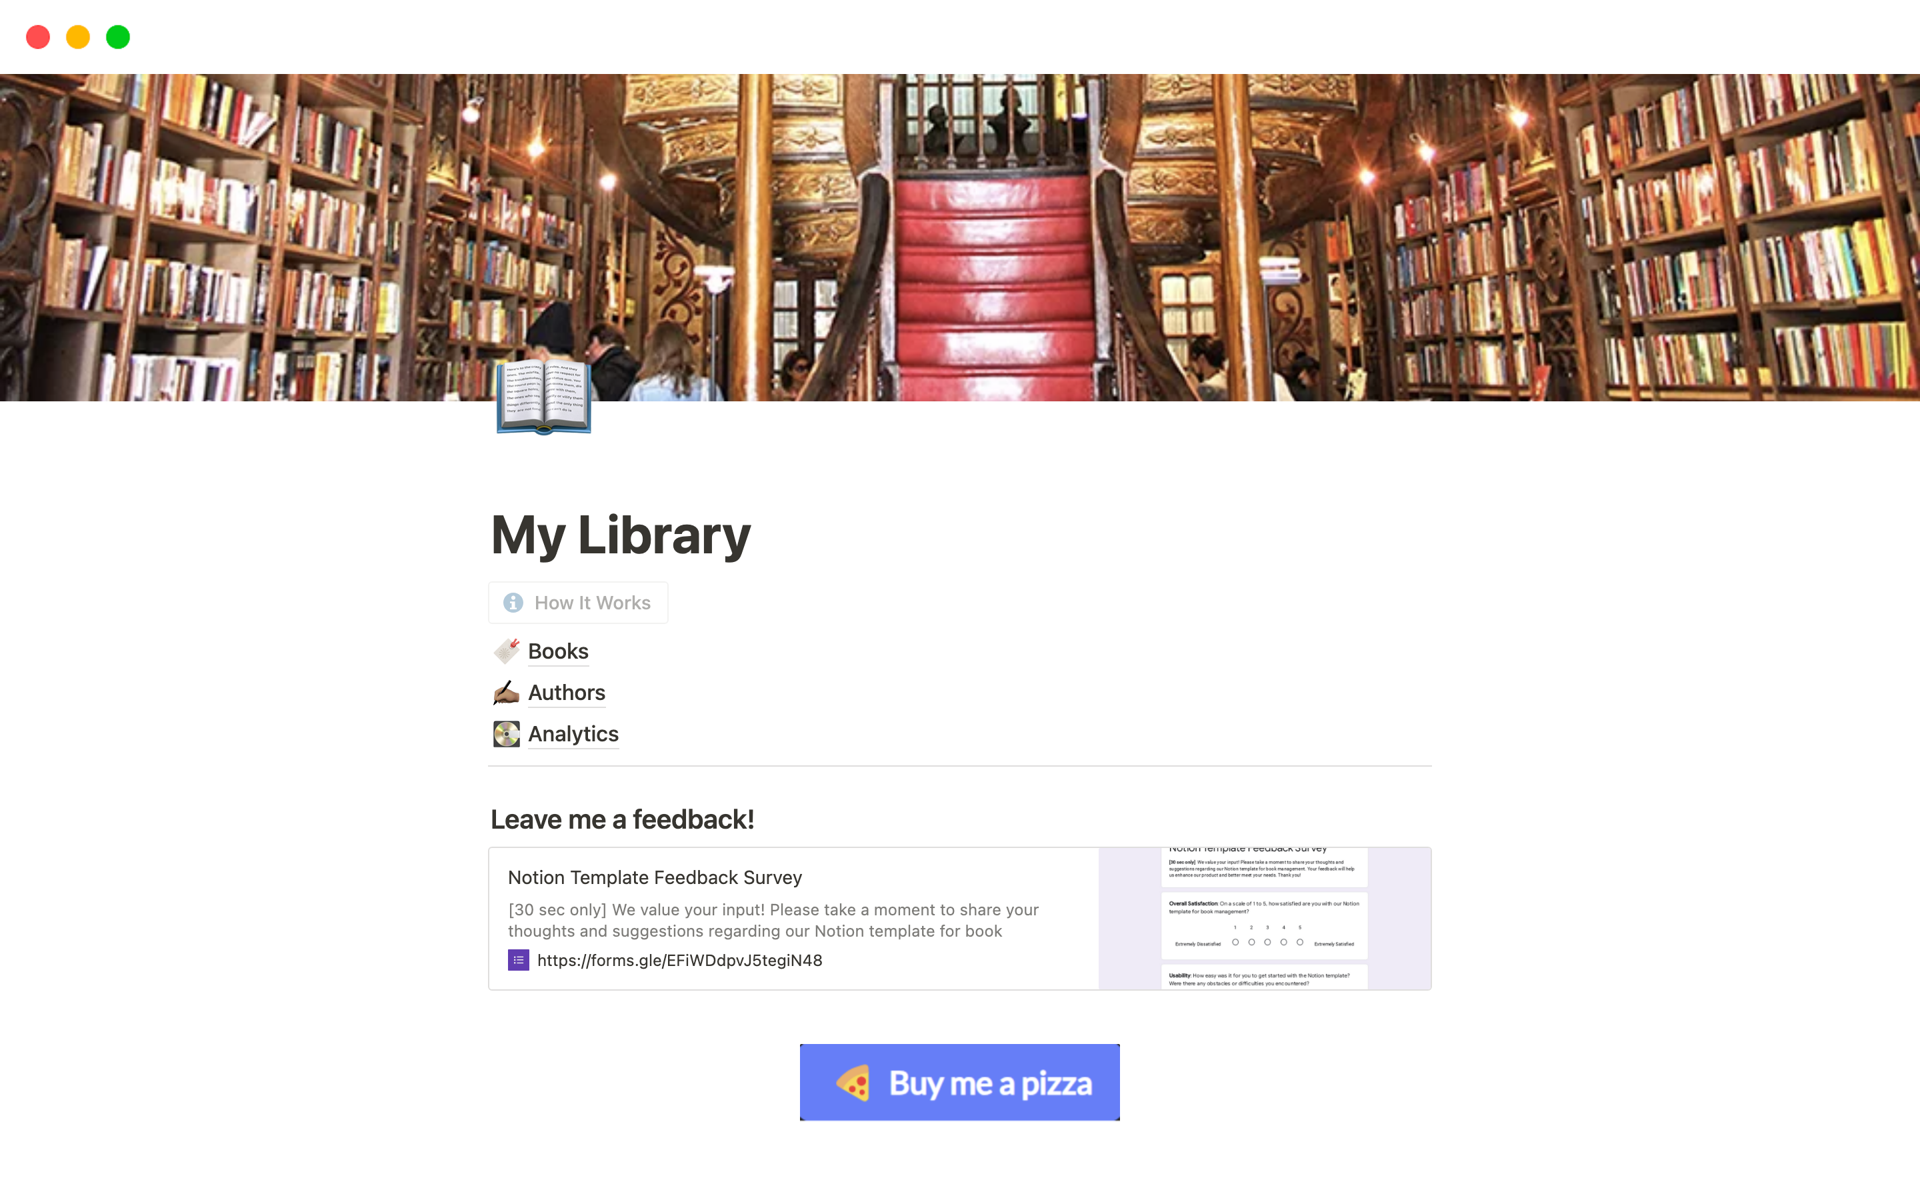 Enhance your reading experience with this Notion template: seamlessly link authors, monitor reading progress, and enjoy automatic calculations. Elevate your literary journey. 📖🚀